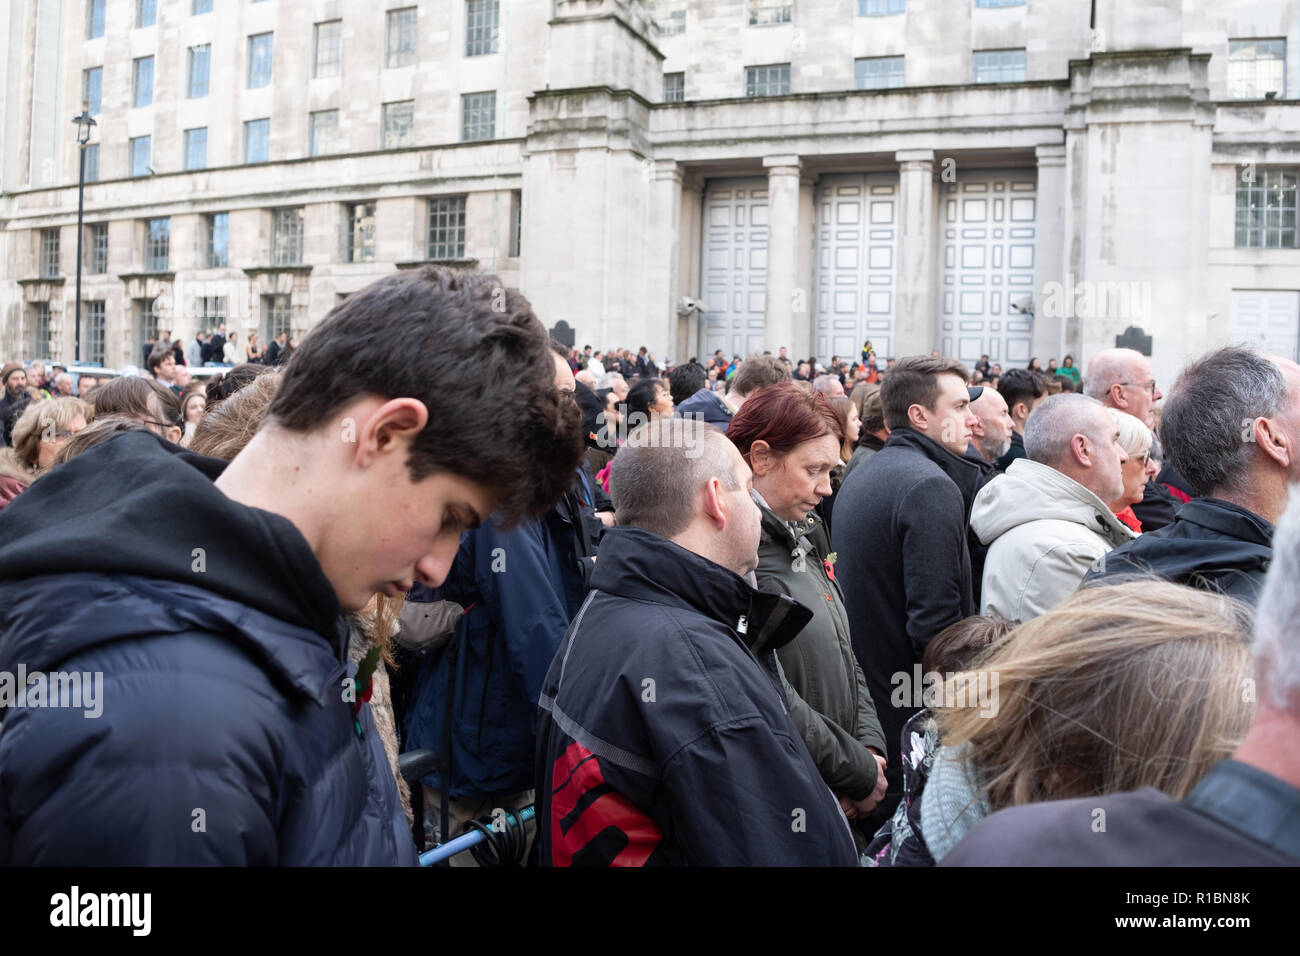 London UK, 11th November 2018: Long queues of people attending the National Service of Remembrance at the Cenotaph in London on Remembrance Sunday. Credit: On Sight Photographic/Alamy Live News Stock Photo